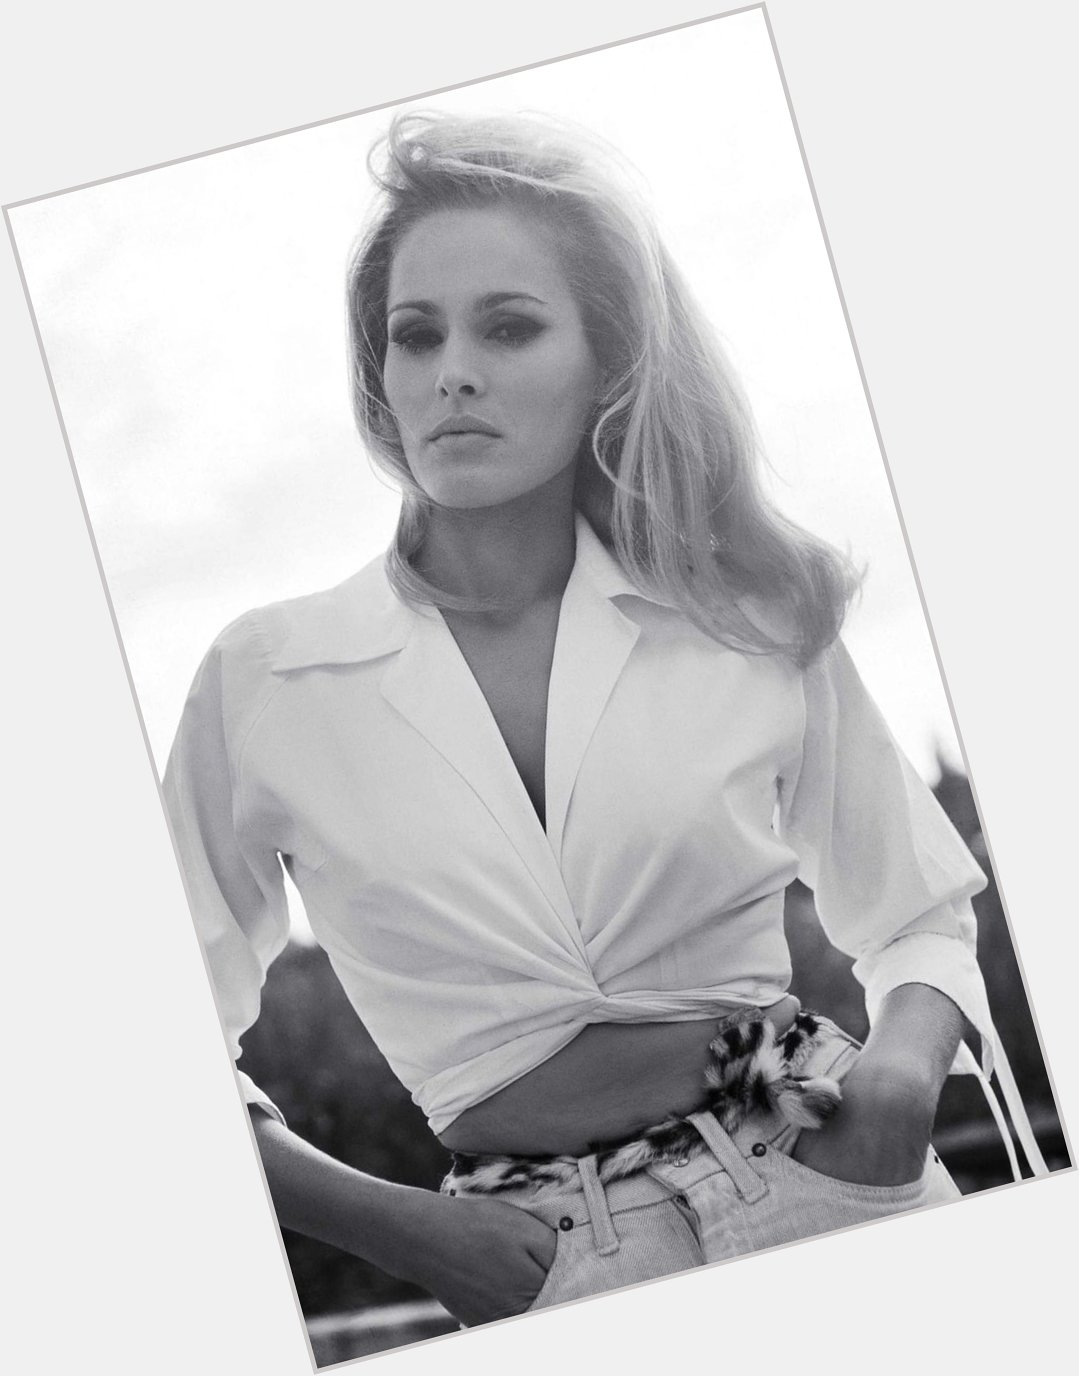 Happy Belated 86th Birthday to beautiful Swiss actress Ursula Andress born March 19, 1936! 